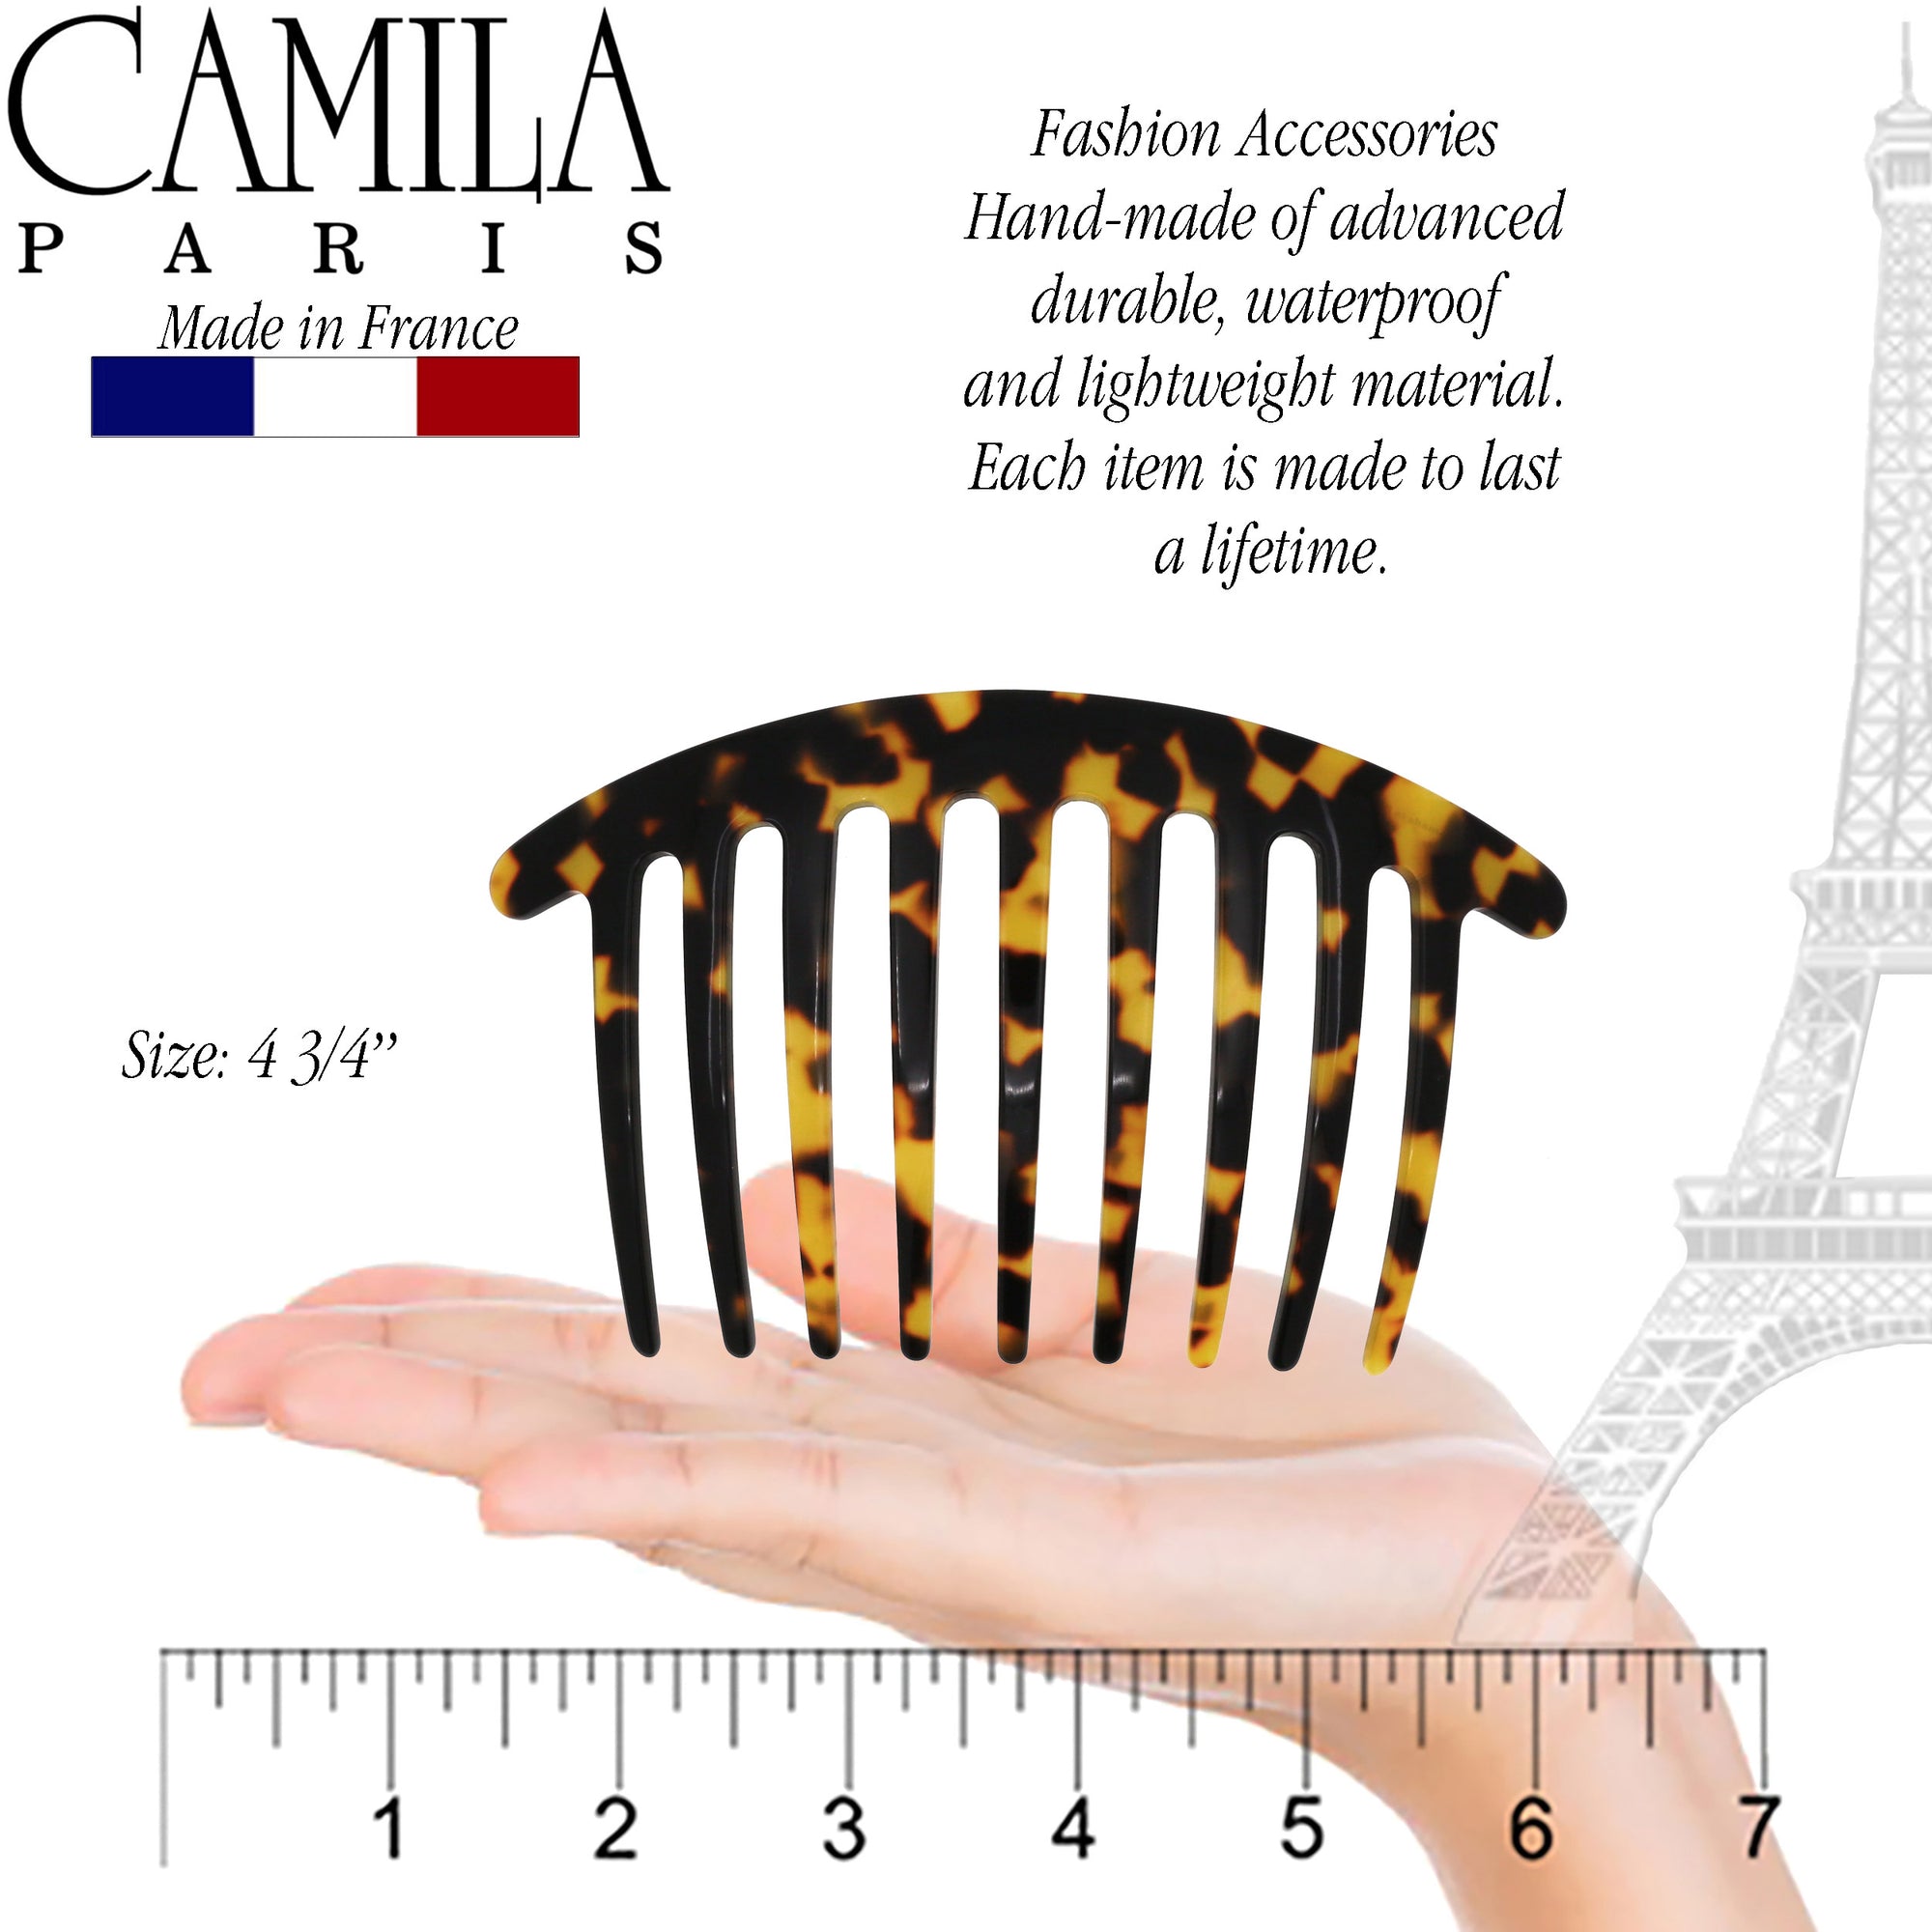 Camila Paris Large Handmade Rounded Side Comb